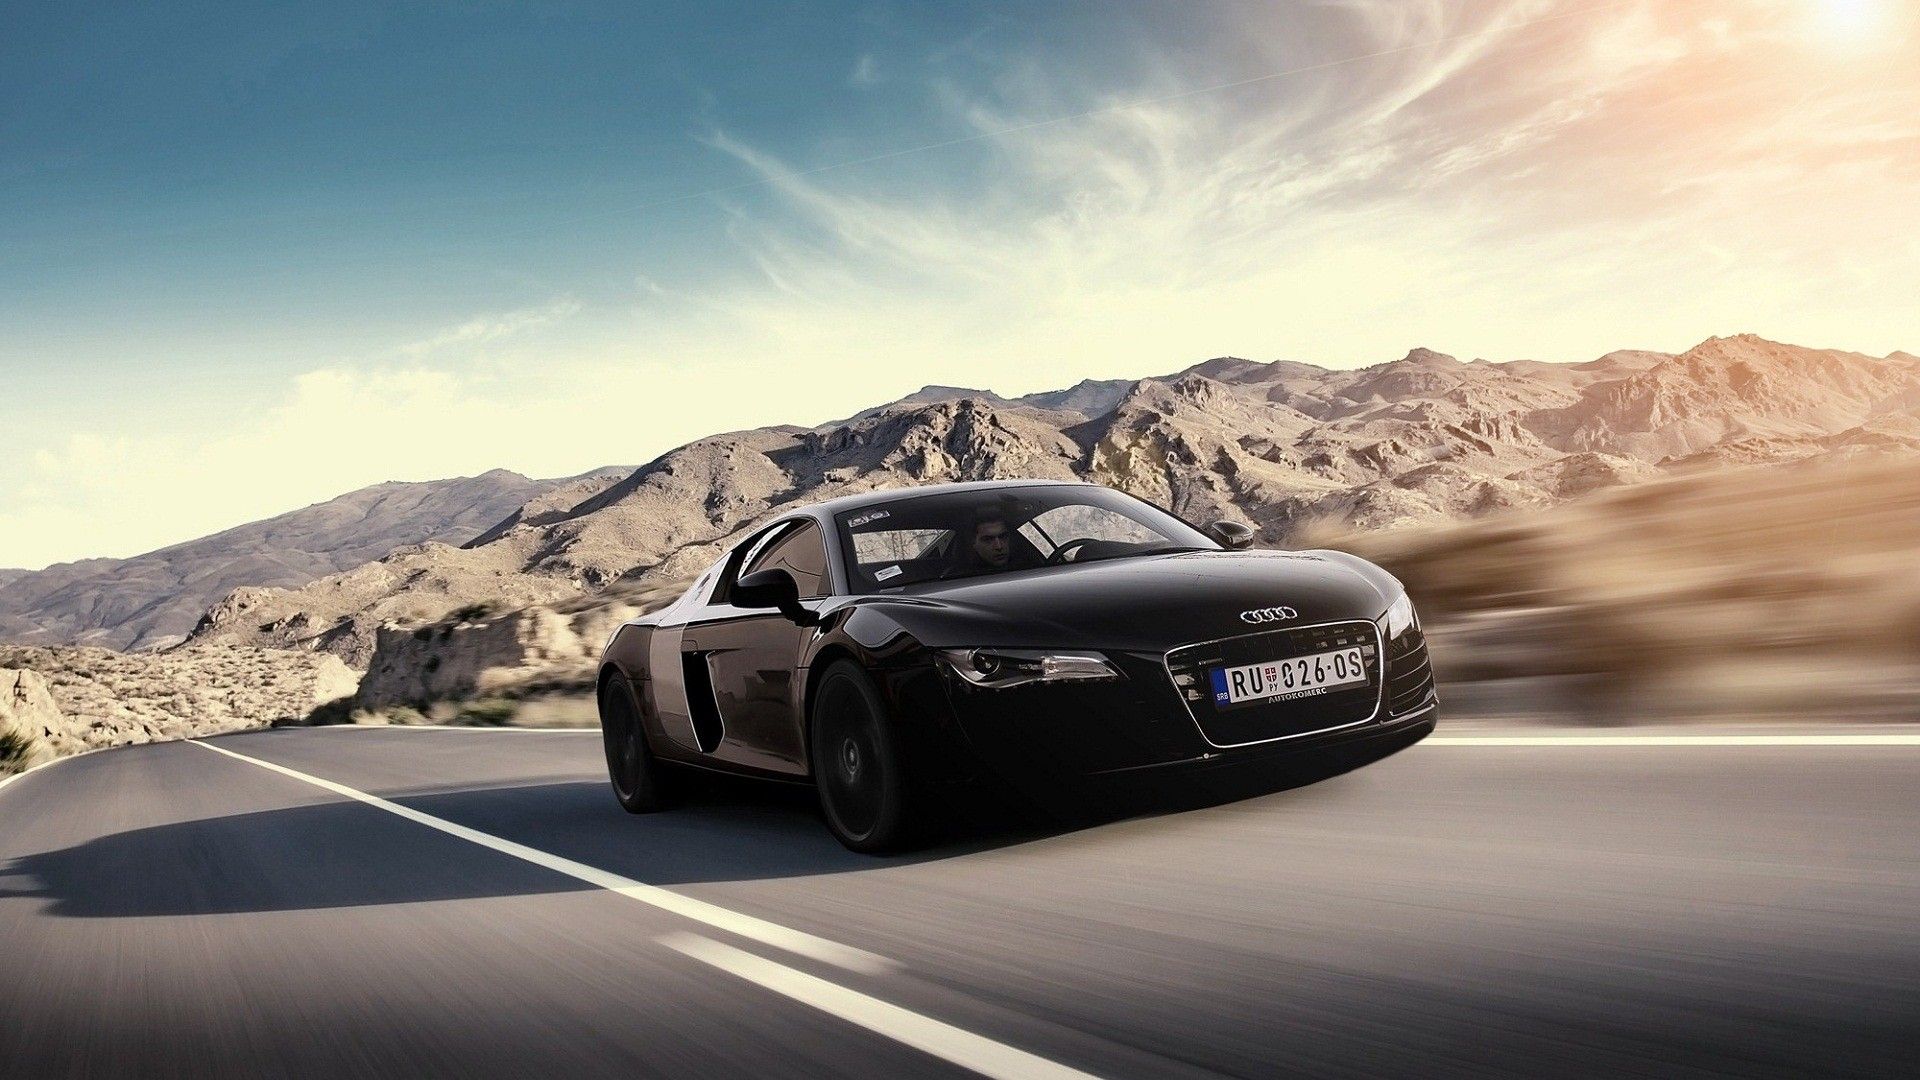 43 Audi Wallpapers / Backgrounds in HD For Free Download